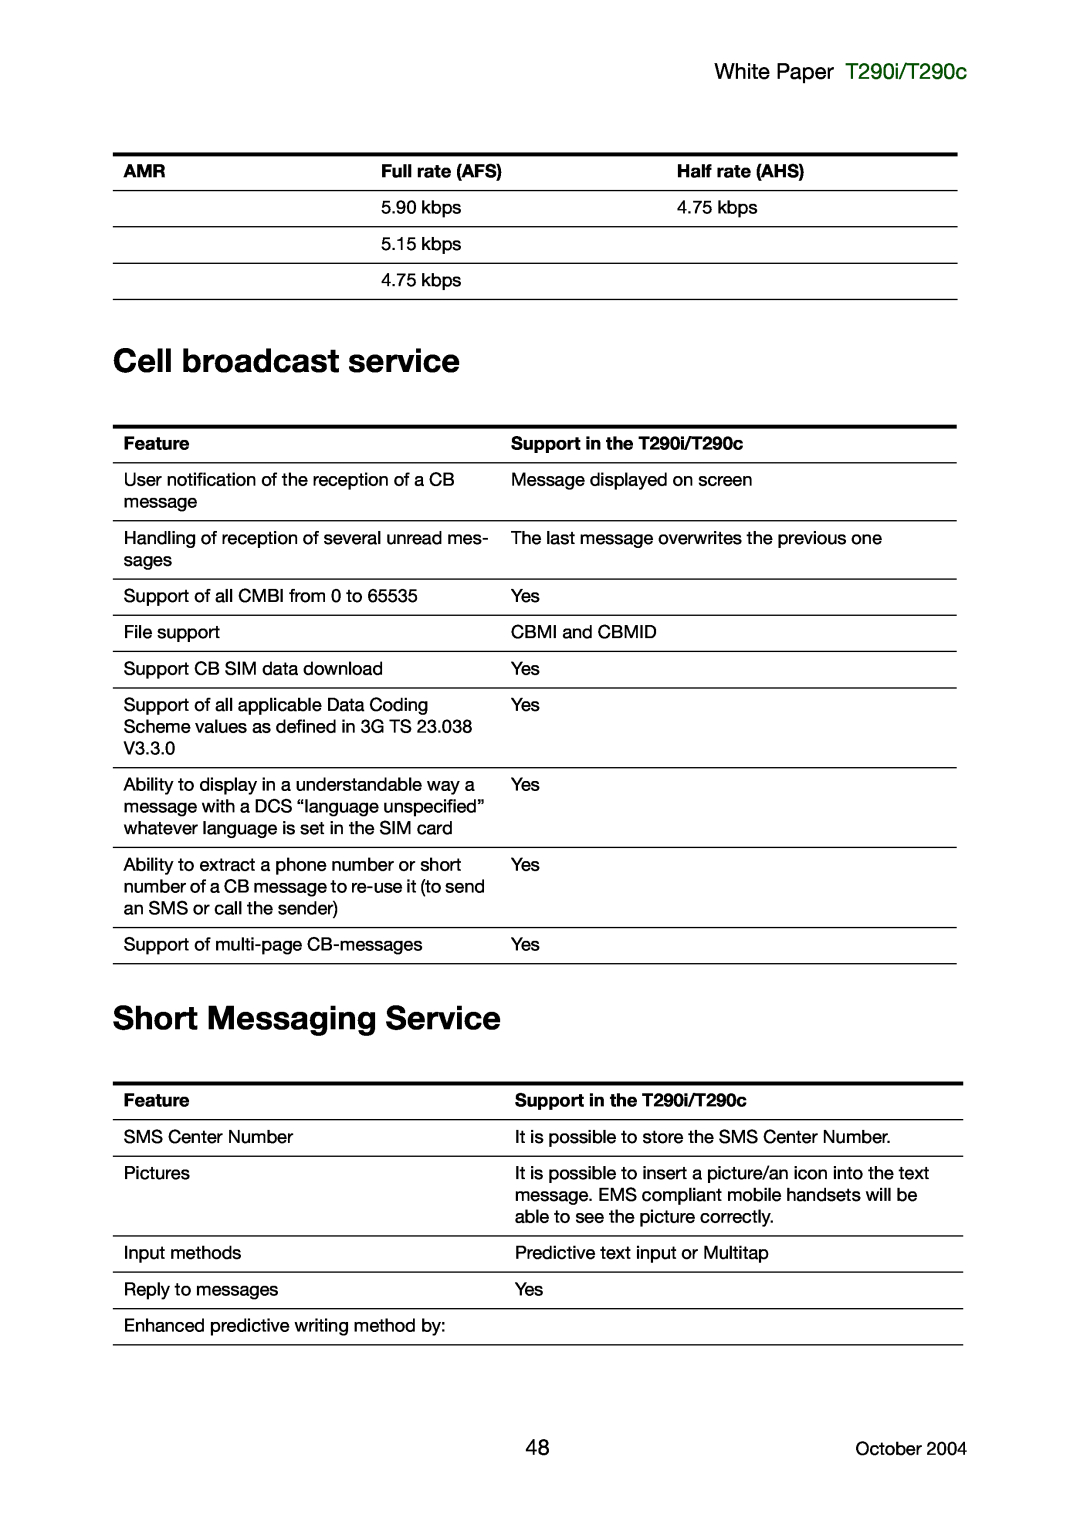 Sony Ericsson manual Cell broadcast service, Short Messaging Service, White Paper T290i/T290c 